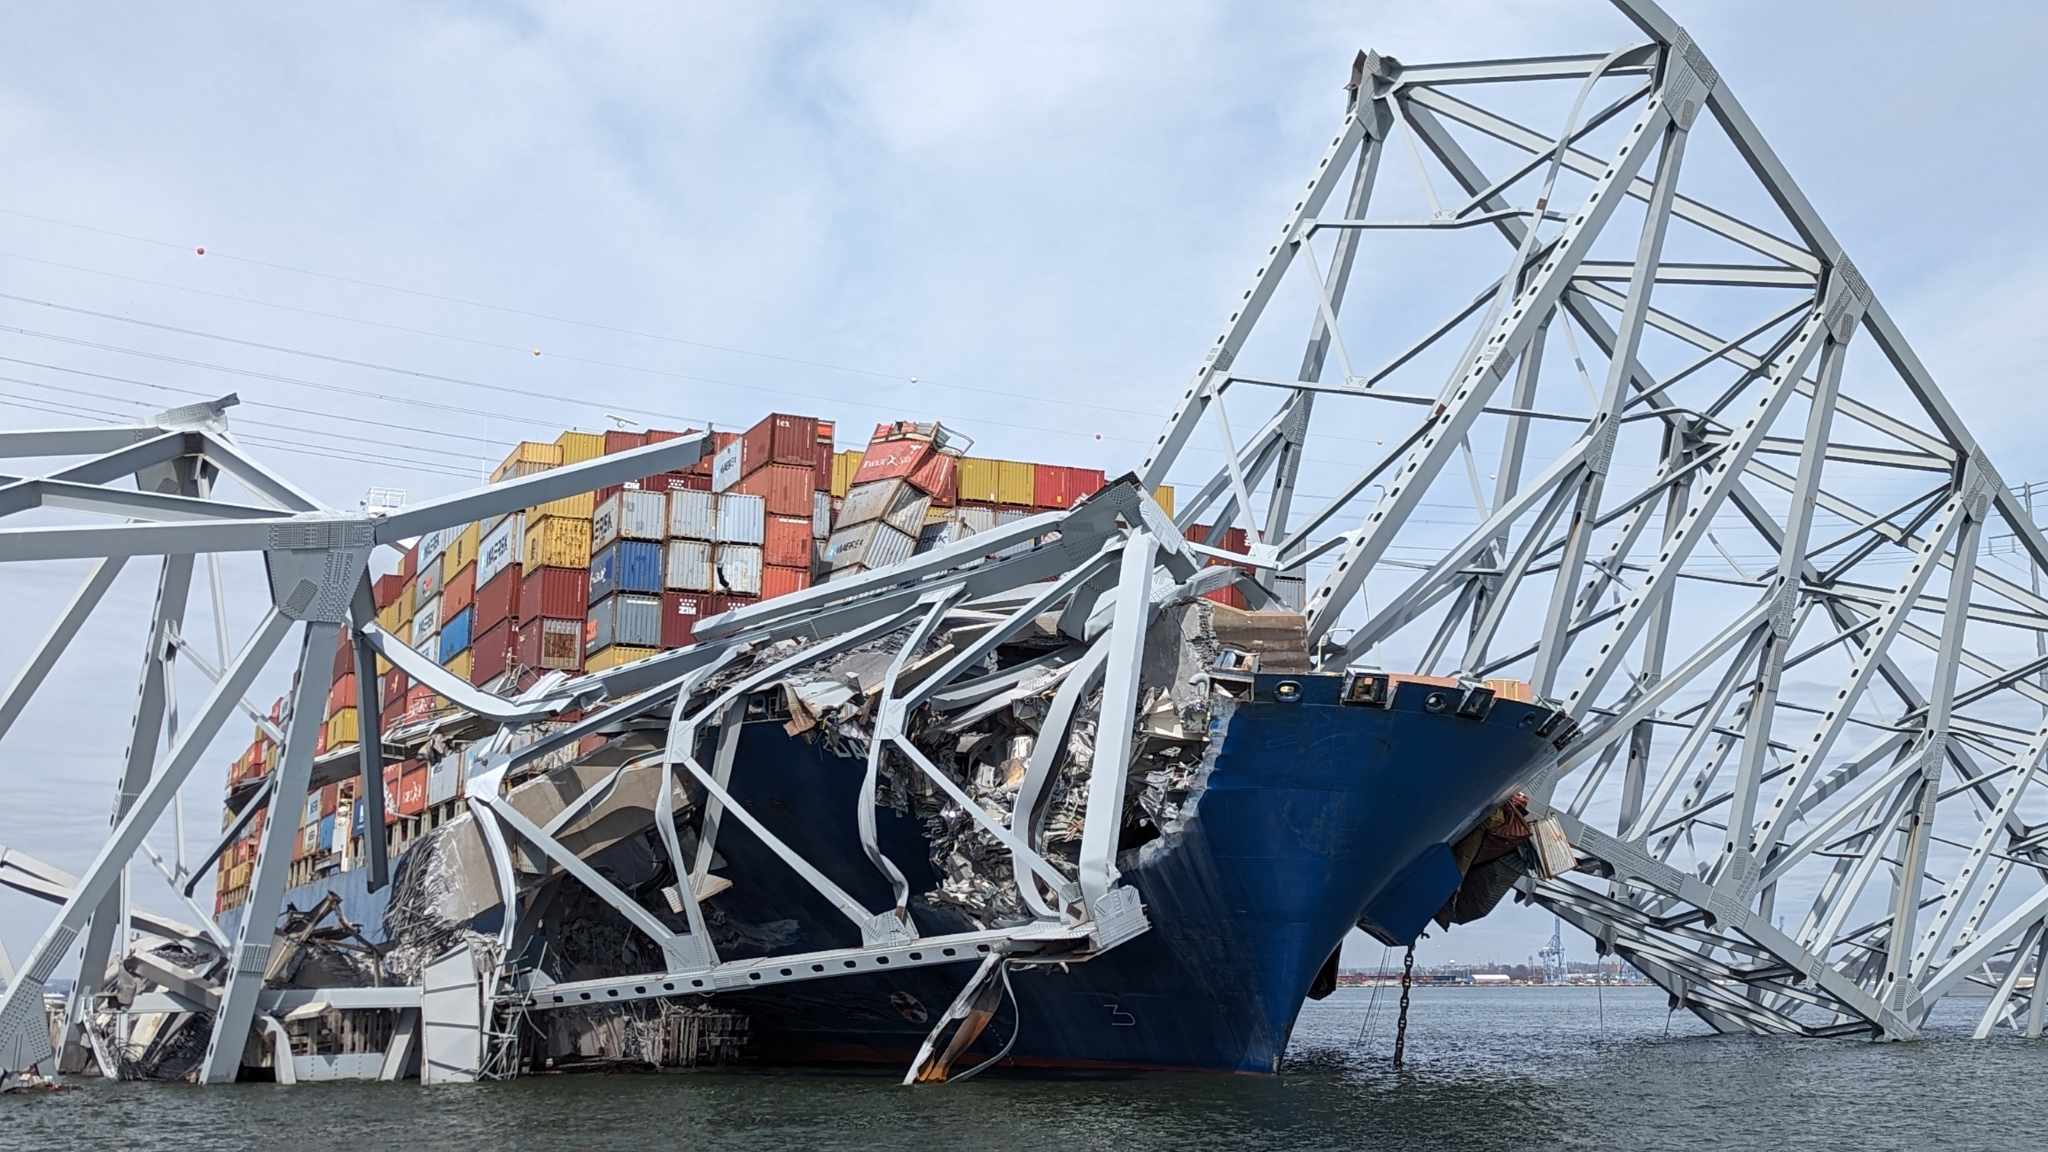 Head on view of container ship Dali crashing into the Francis Scott Key Bride in the Patapsco River.